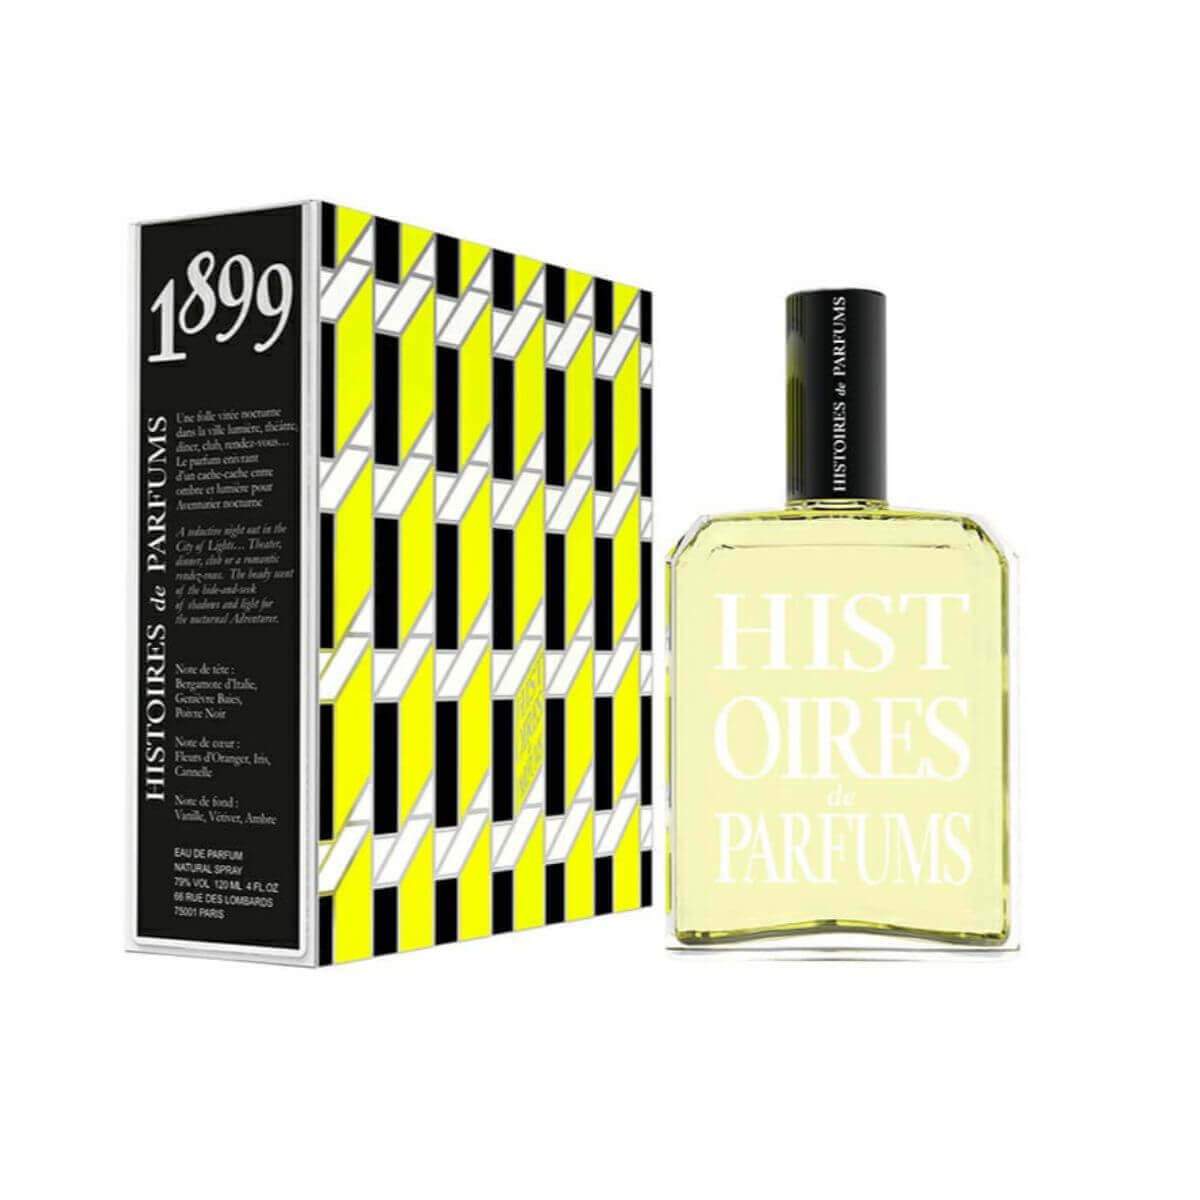 Histoires De Parfum – Hemingway 1899, A Unisex Radiating Fragrance For The Nocturnal Adventurersan Oriental, Woody Scent Suitable For A Seductive Night Out In Paris, The City Of Lightthe Notes Of Cinnamon, Juniper And Vetiver Create An Irresistible SeductionTop Notes : Black Pepper, Juniper, BergamotHeart Notes: Cinnamon, Florentine Iris, Orange BlossomBase Notes: Amber, Vetiver, Vanilla .